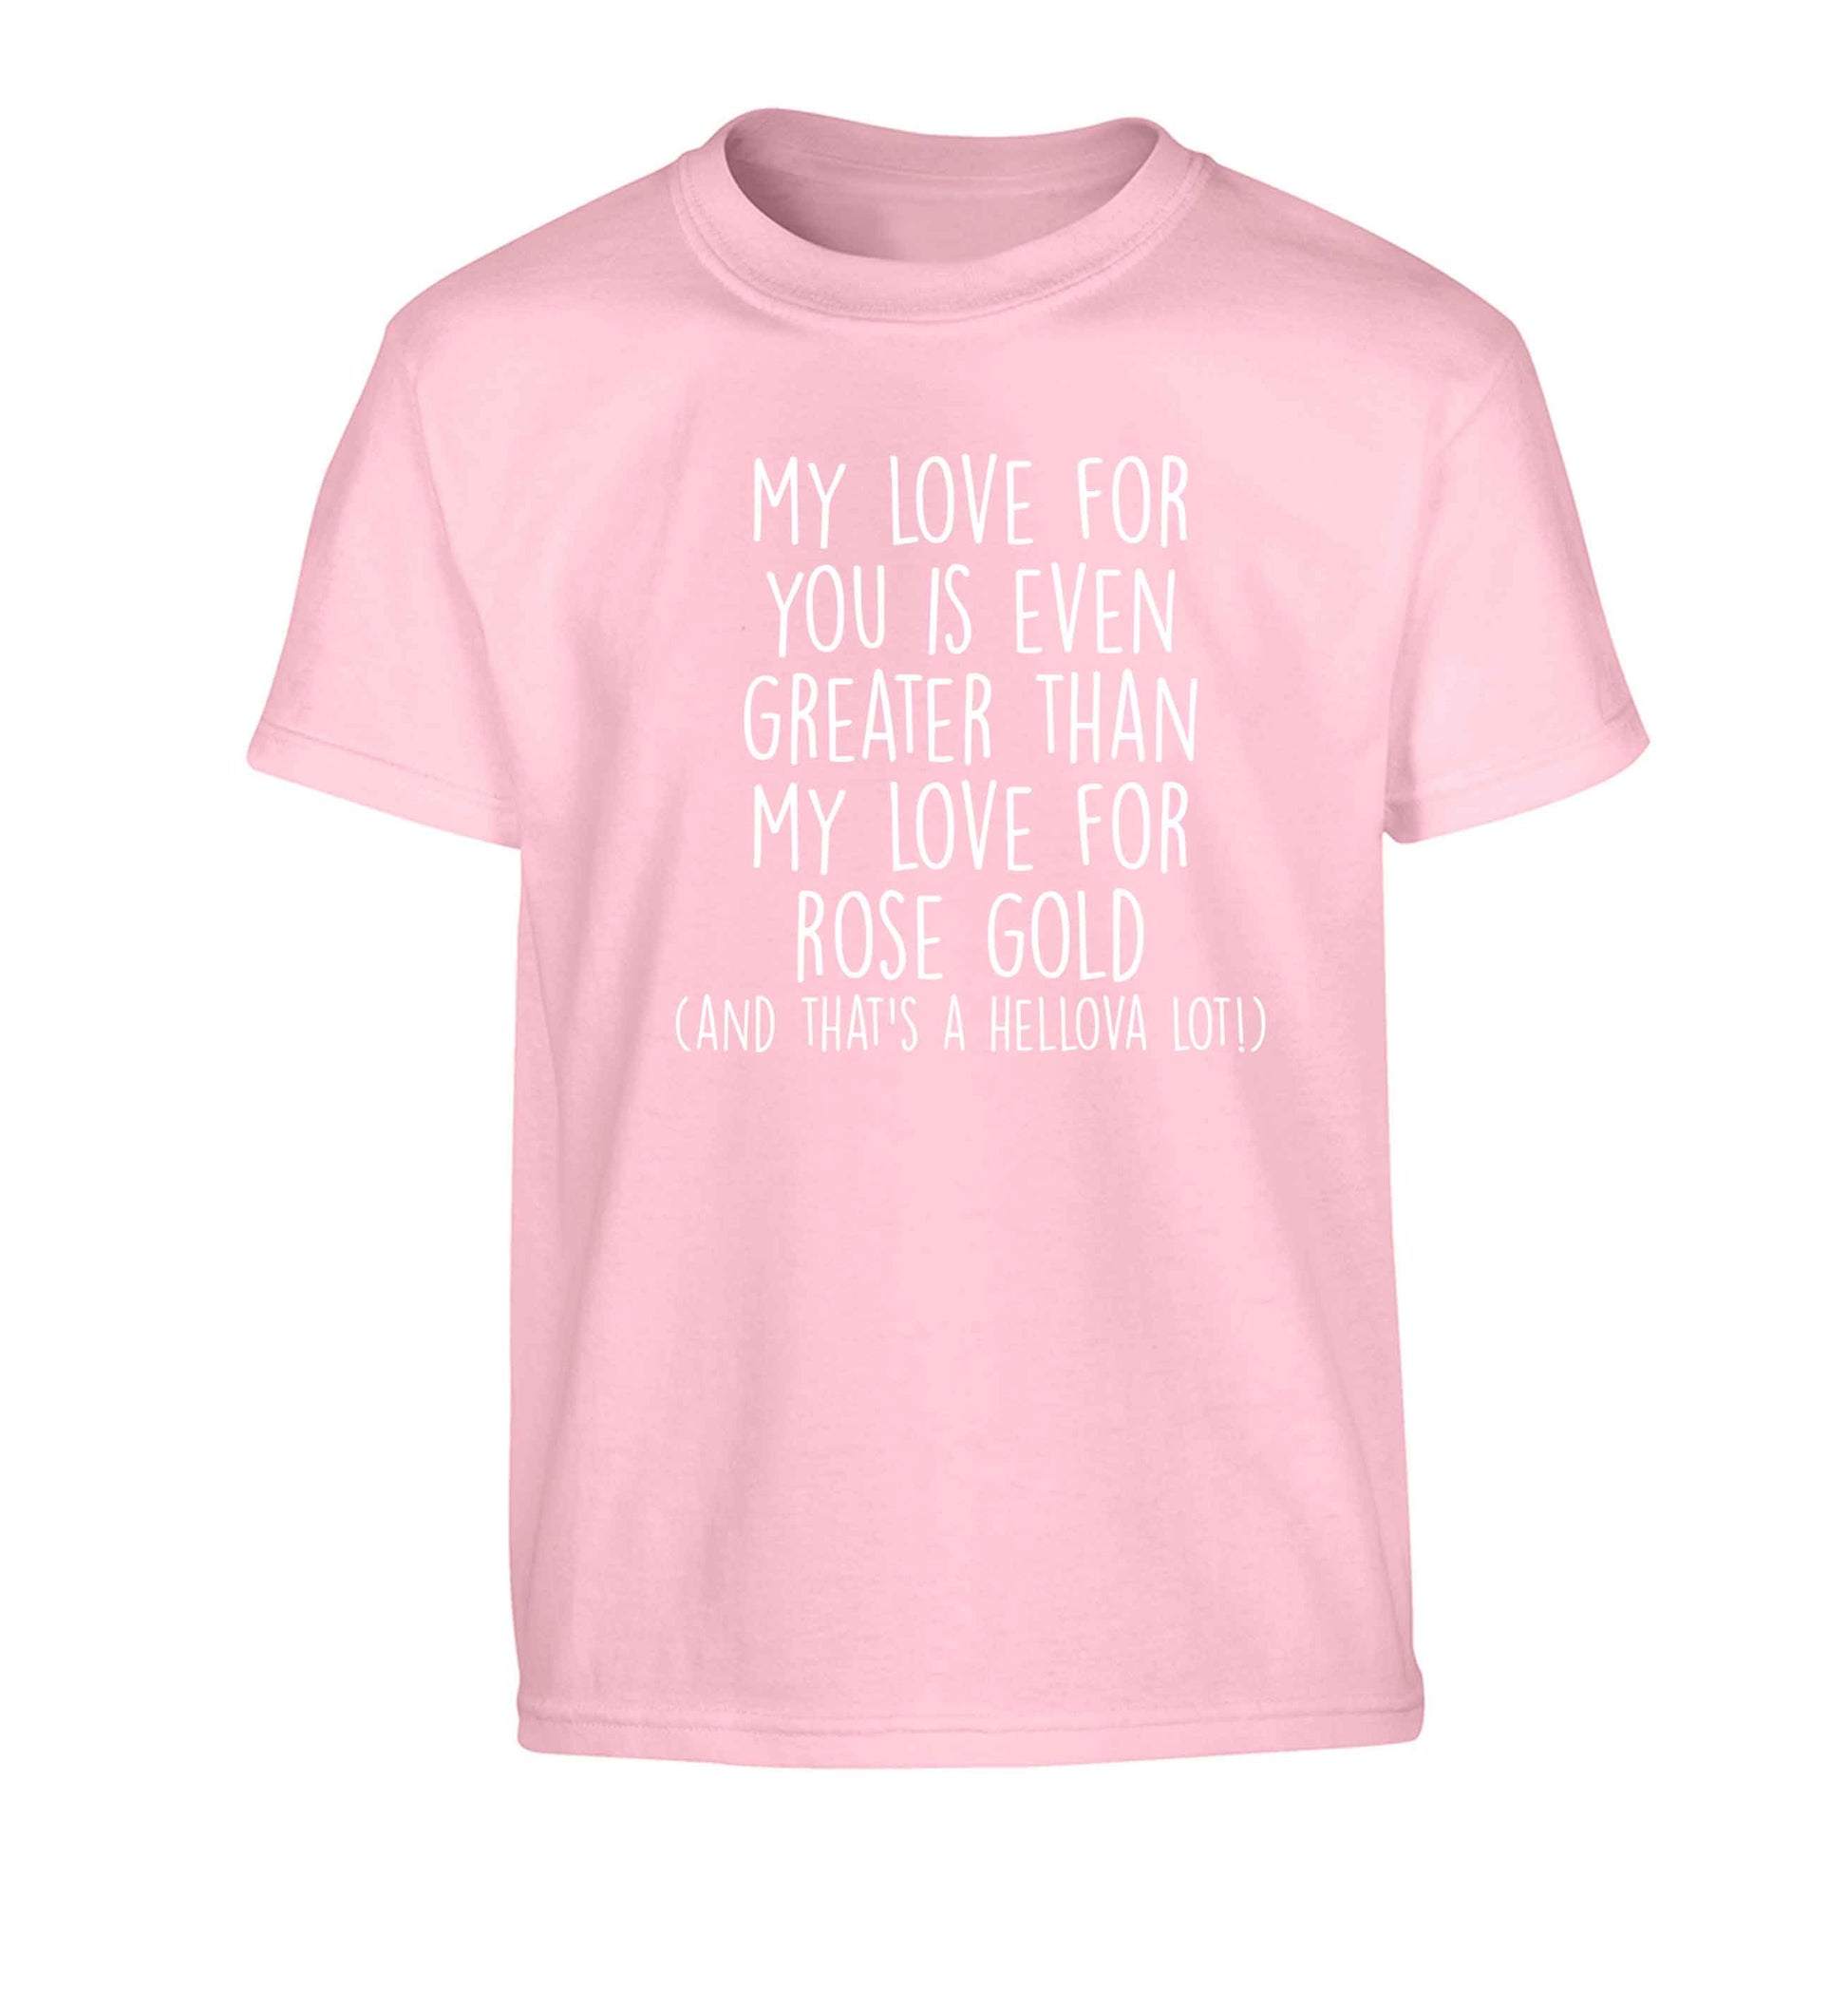 My love for you is even greater than my love for rose gold (and that's a hellova lot) Children's light pink Tshirt 12-13 Years